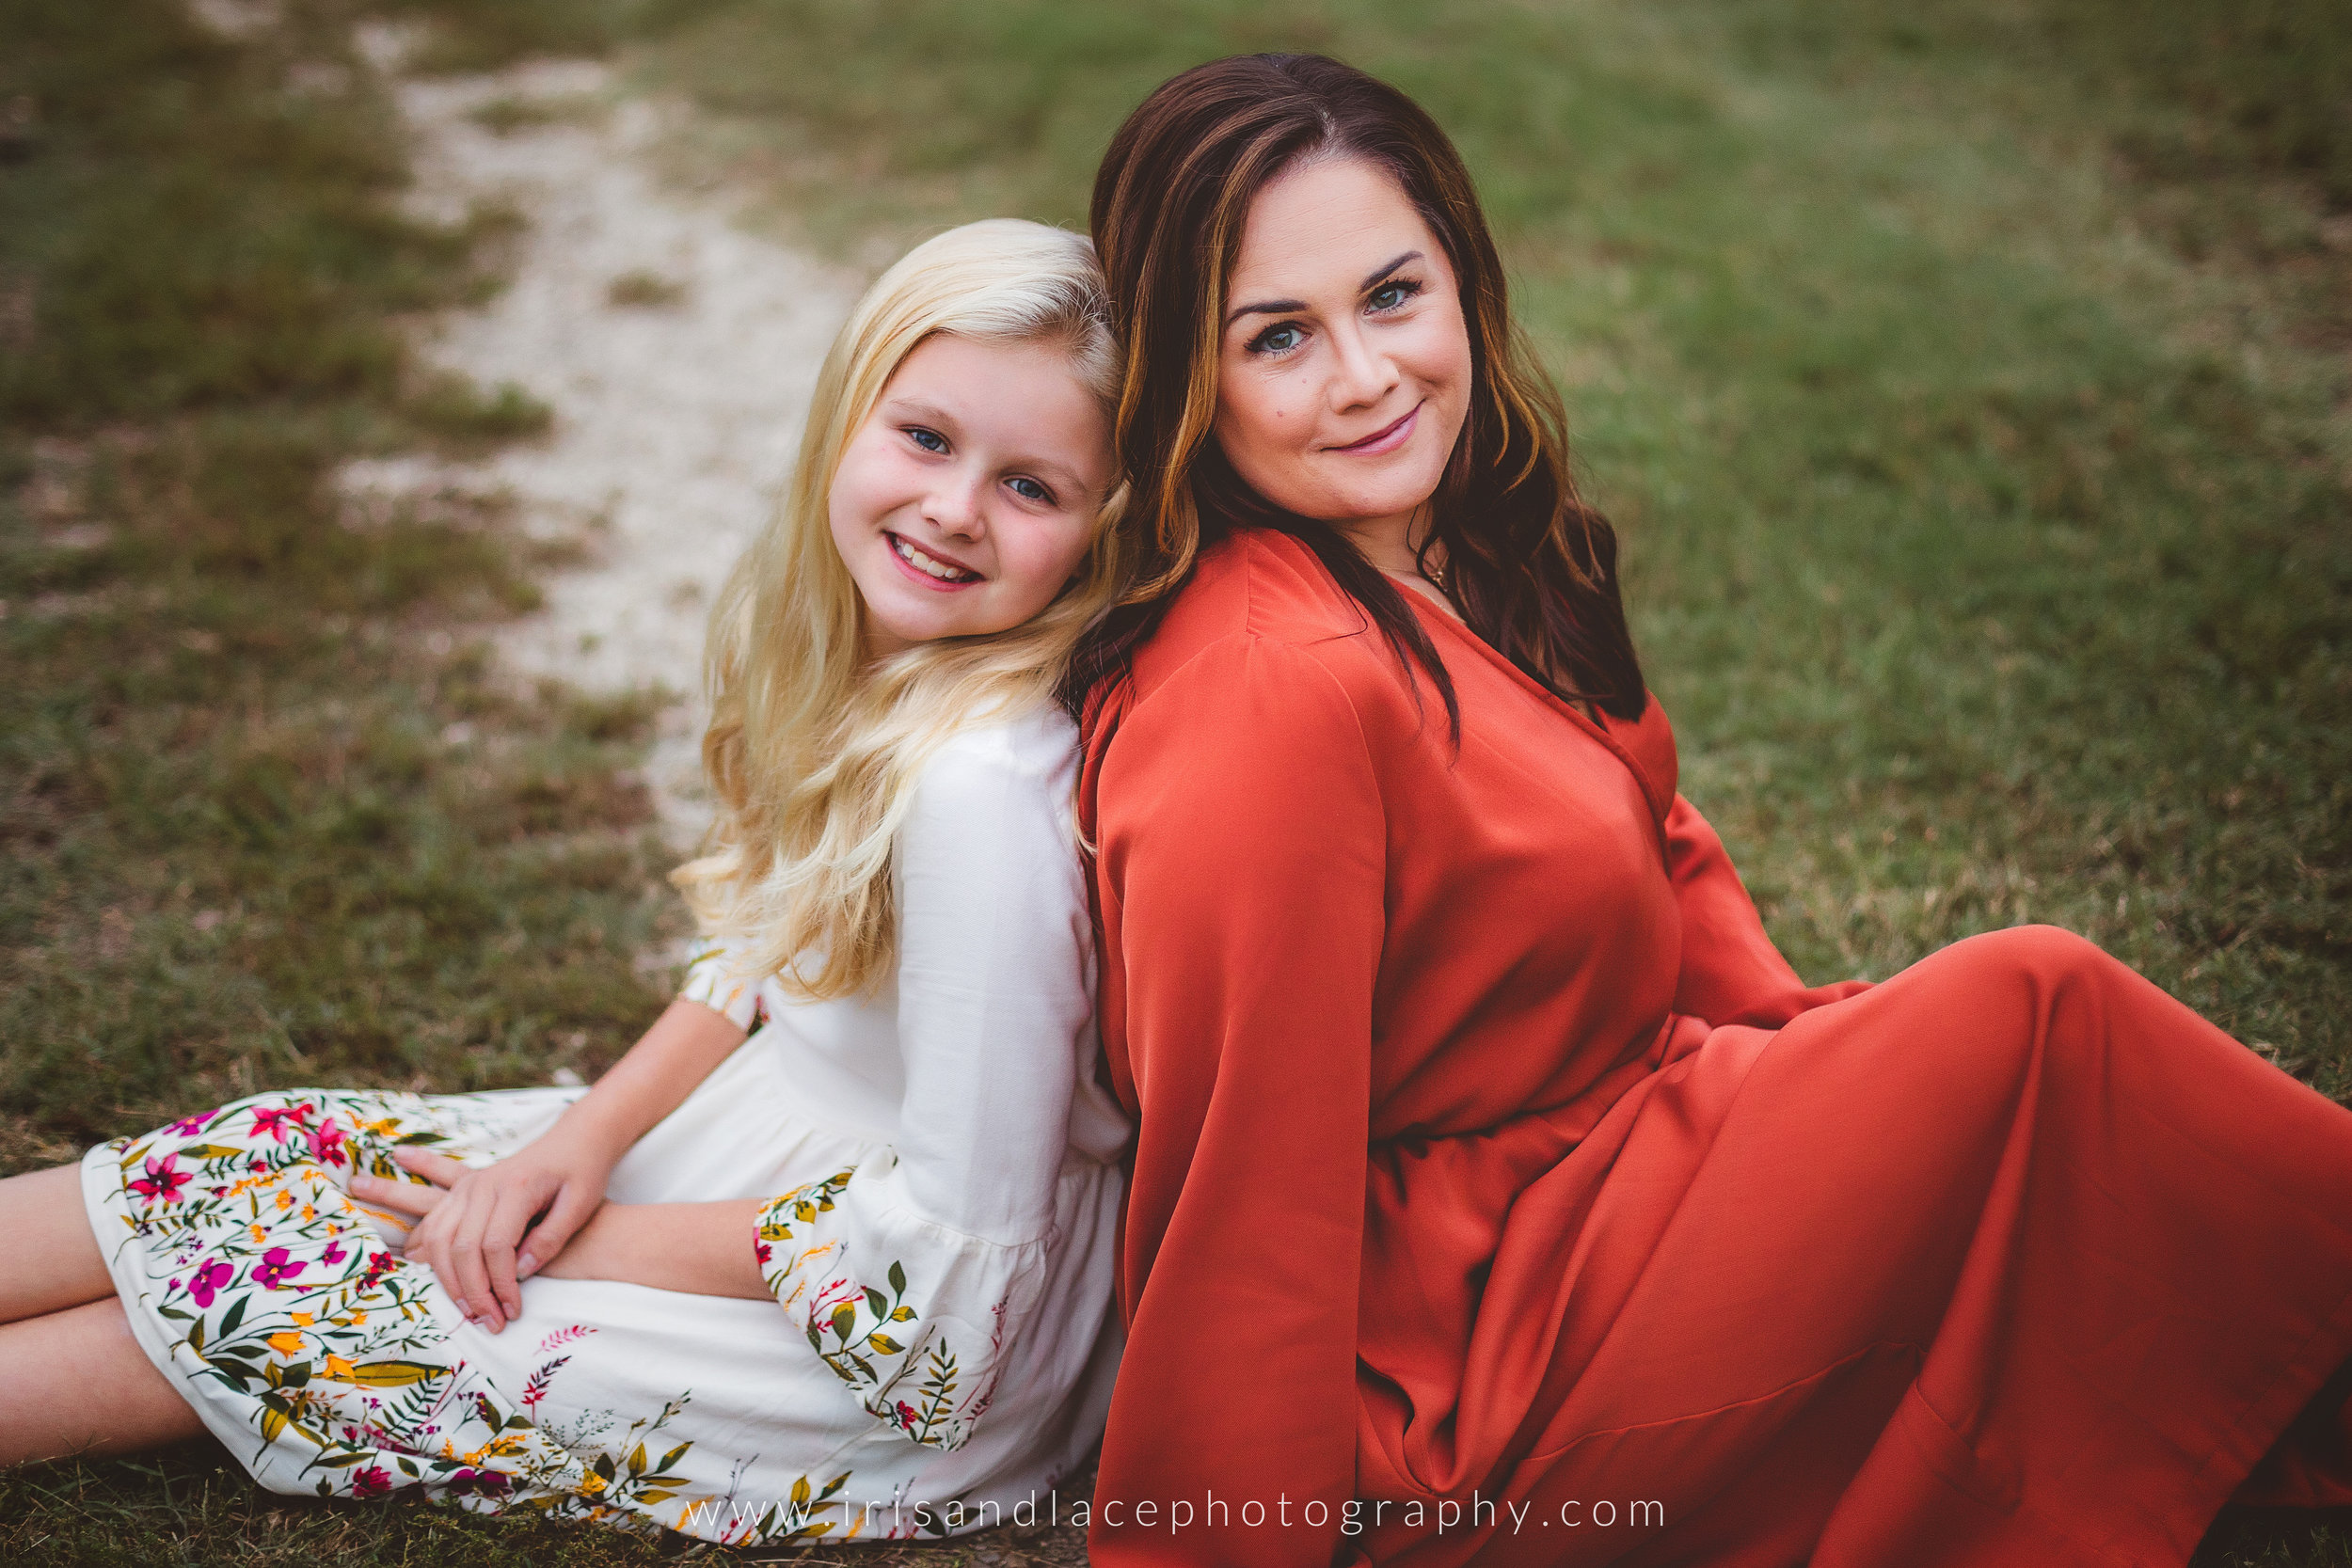 Photography Poses for Mother and Daughter - Lemon8 Search